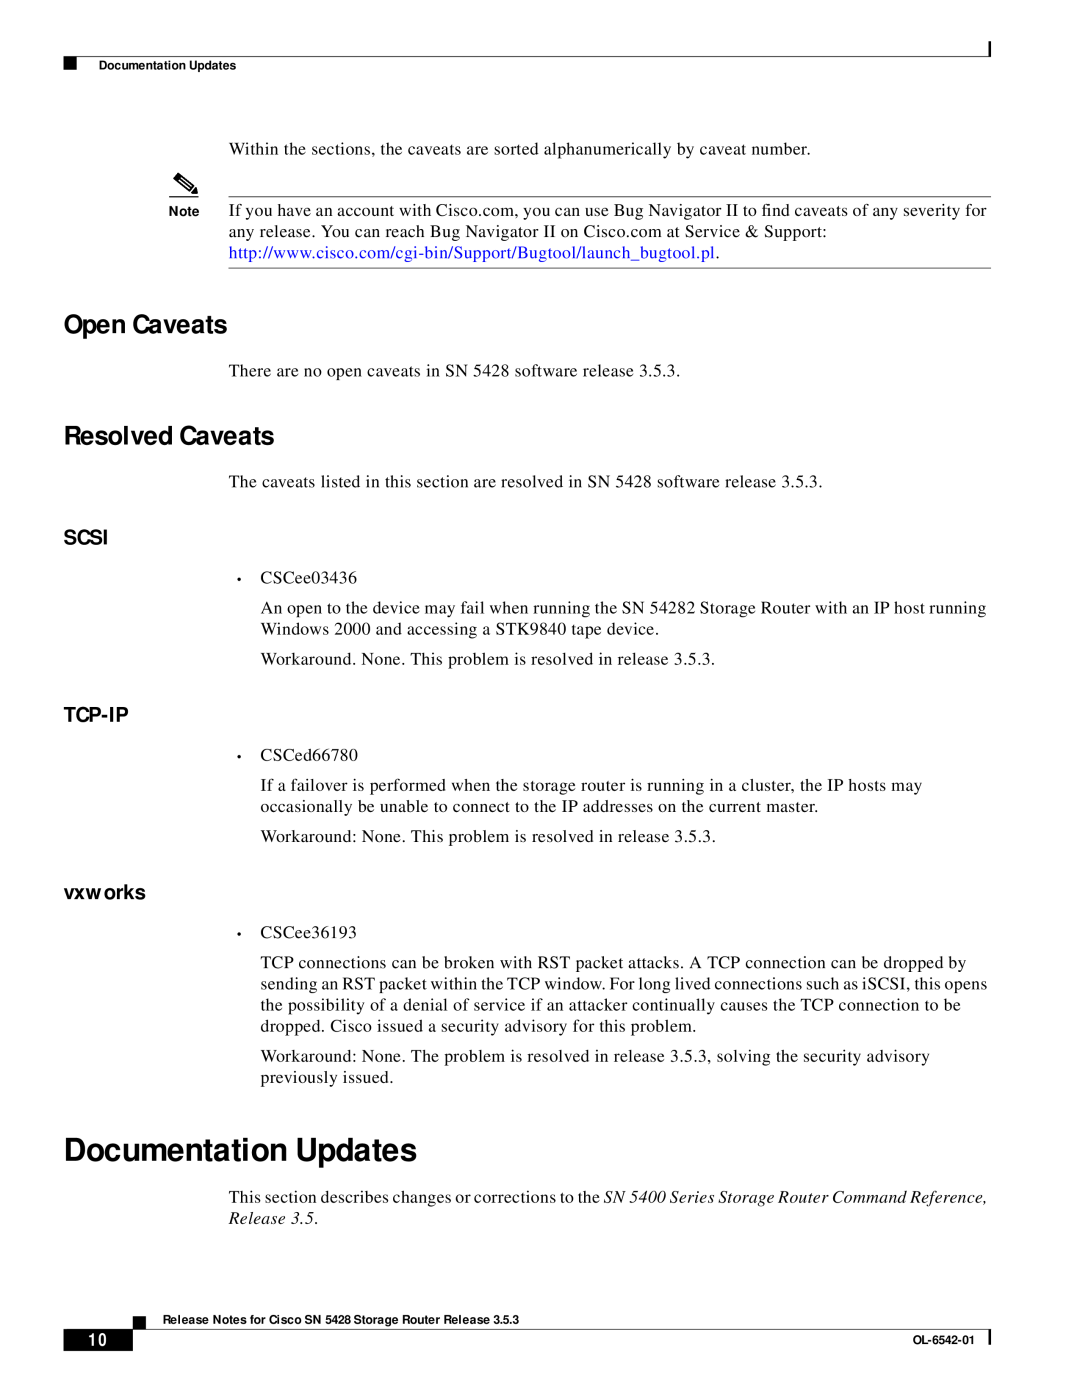 Cisco Systems SN 5428 manual Documentation Updates, Open Caveats, Resolved Caveats, Scsi, Tcp-Ip, vxworks 